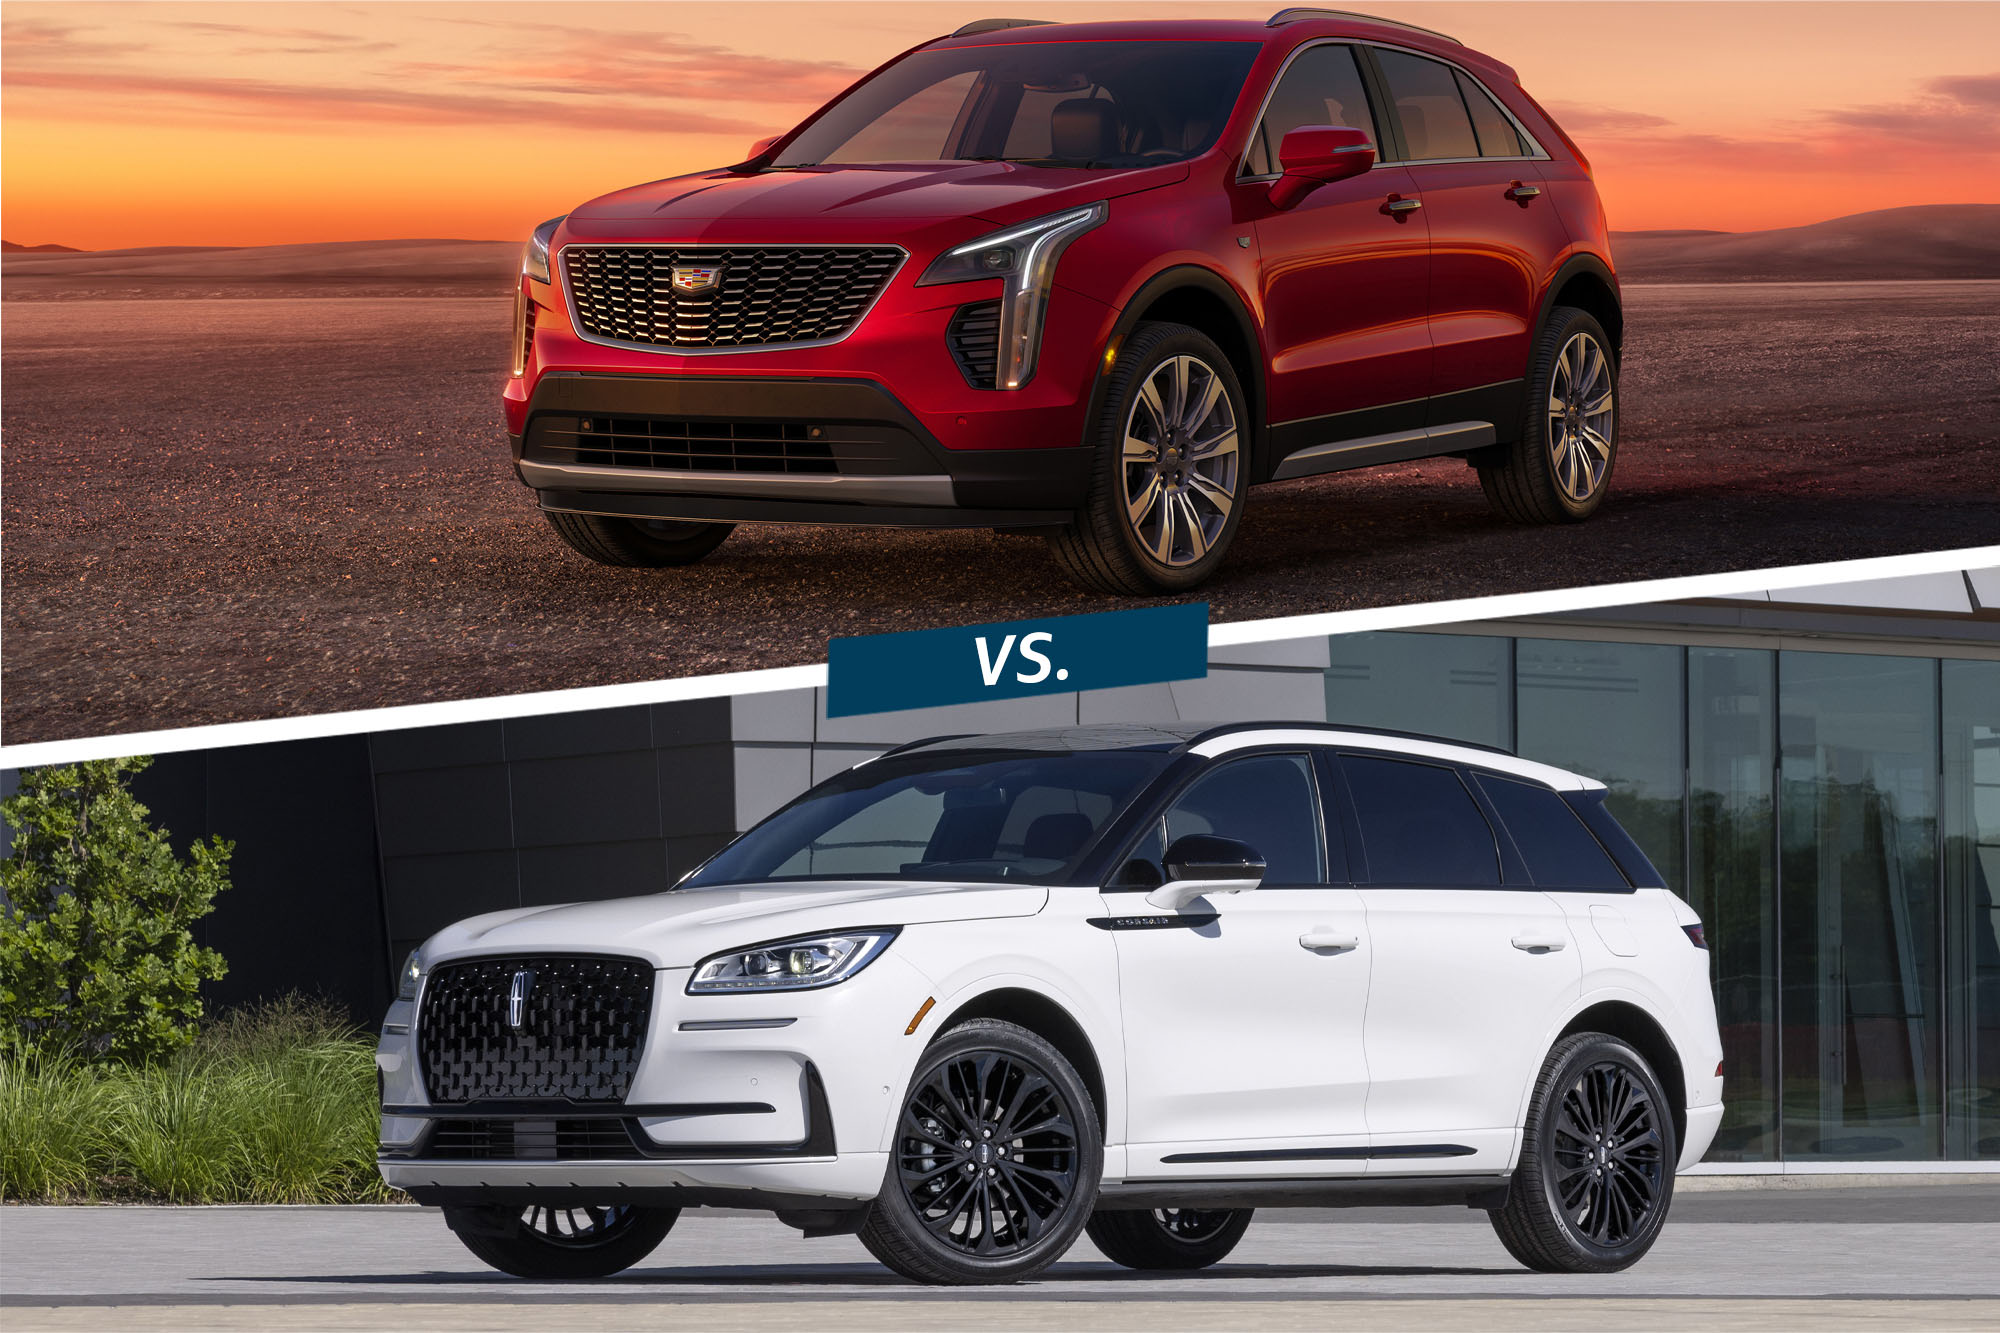 2023 Cadillac XT4 Premium Luxury in Radiant Red Tintcoat atop a 2023 Lincoln Corsair Reserve in white.